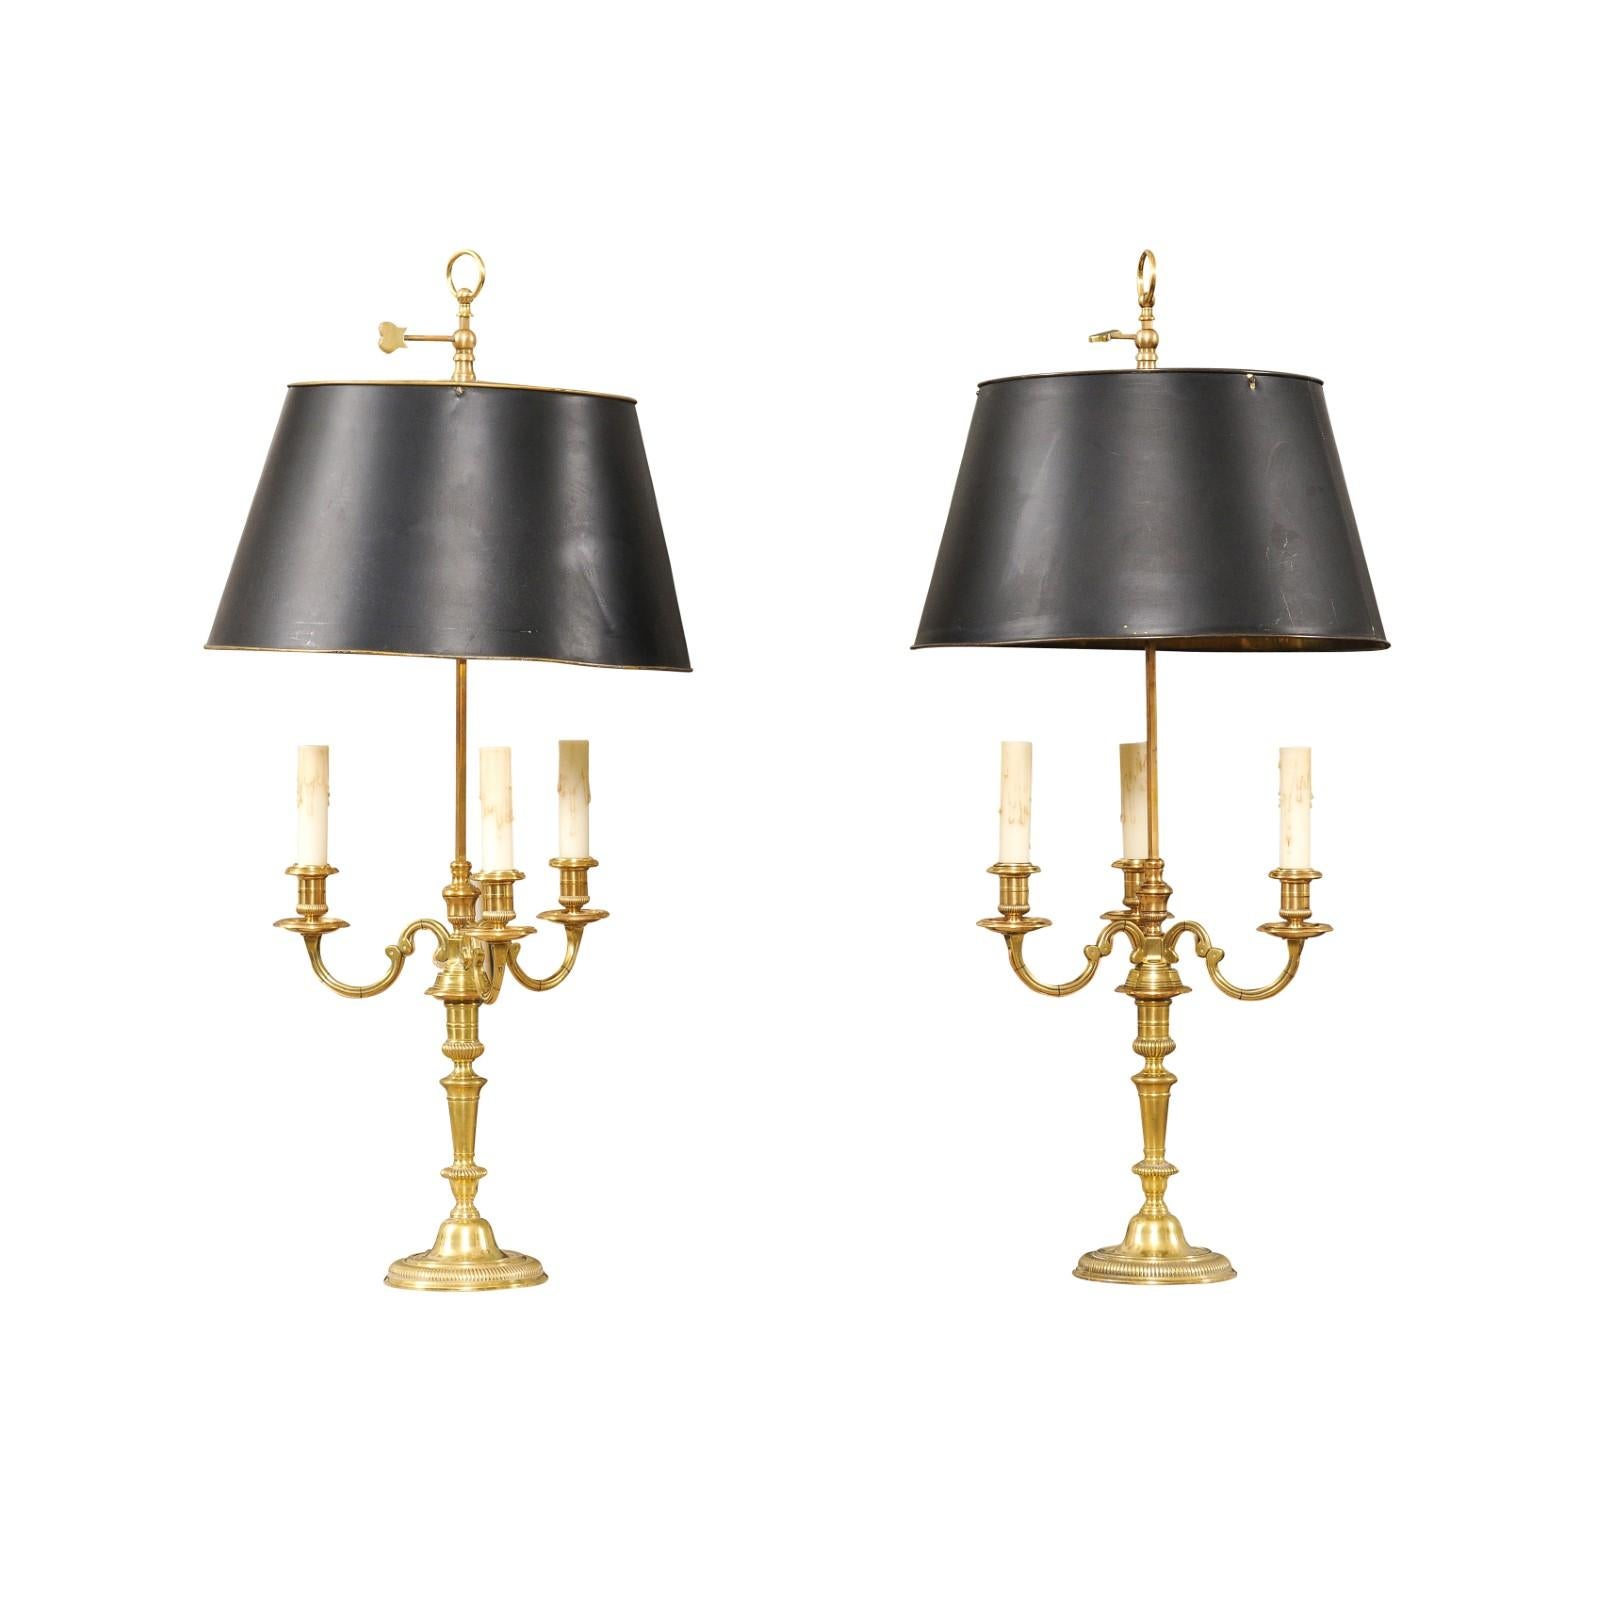 A pair of French turn of the century bronze three-light bouillotte table lamps from the early 20th century with scrolling arms, gadroon motifs and black painted tôle shades. Created in France during the Turn of the Century which saw the transition